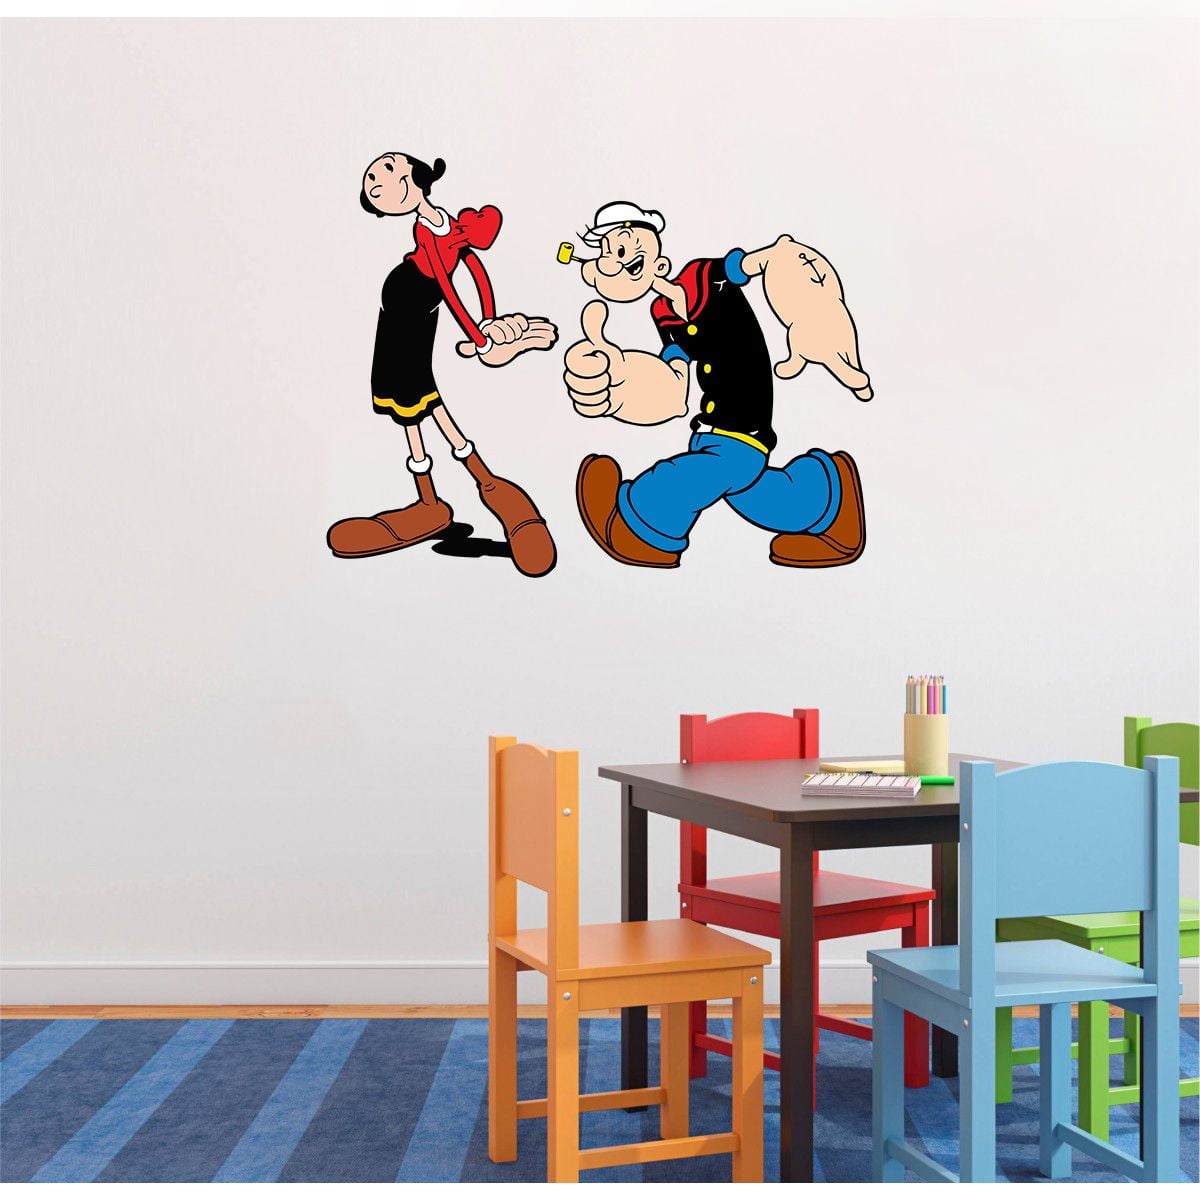 Popeye The Sailor & Olive Cartoon Characters Wall Art Decal Vinyl Sticker  Kids Bedroom Infant Baby Room Durable Waterproof High Quality Sticker Decal  Mural Adhesive Removable Peel and Stick 30x15 inch -